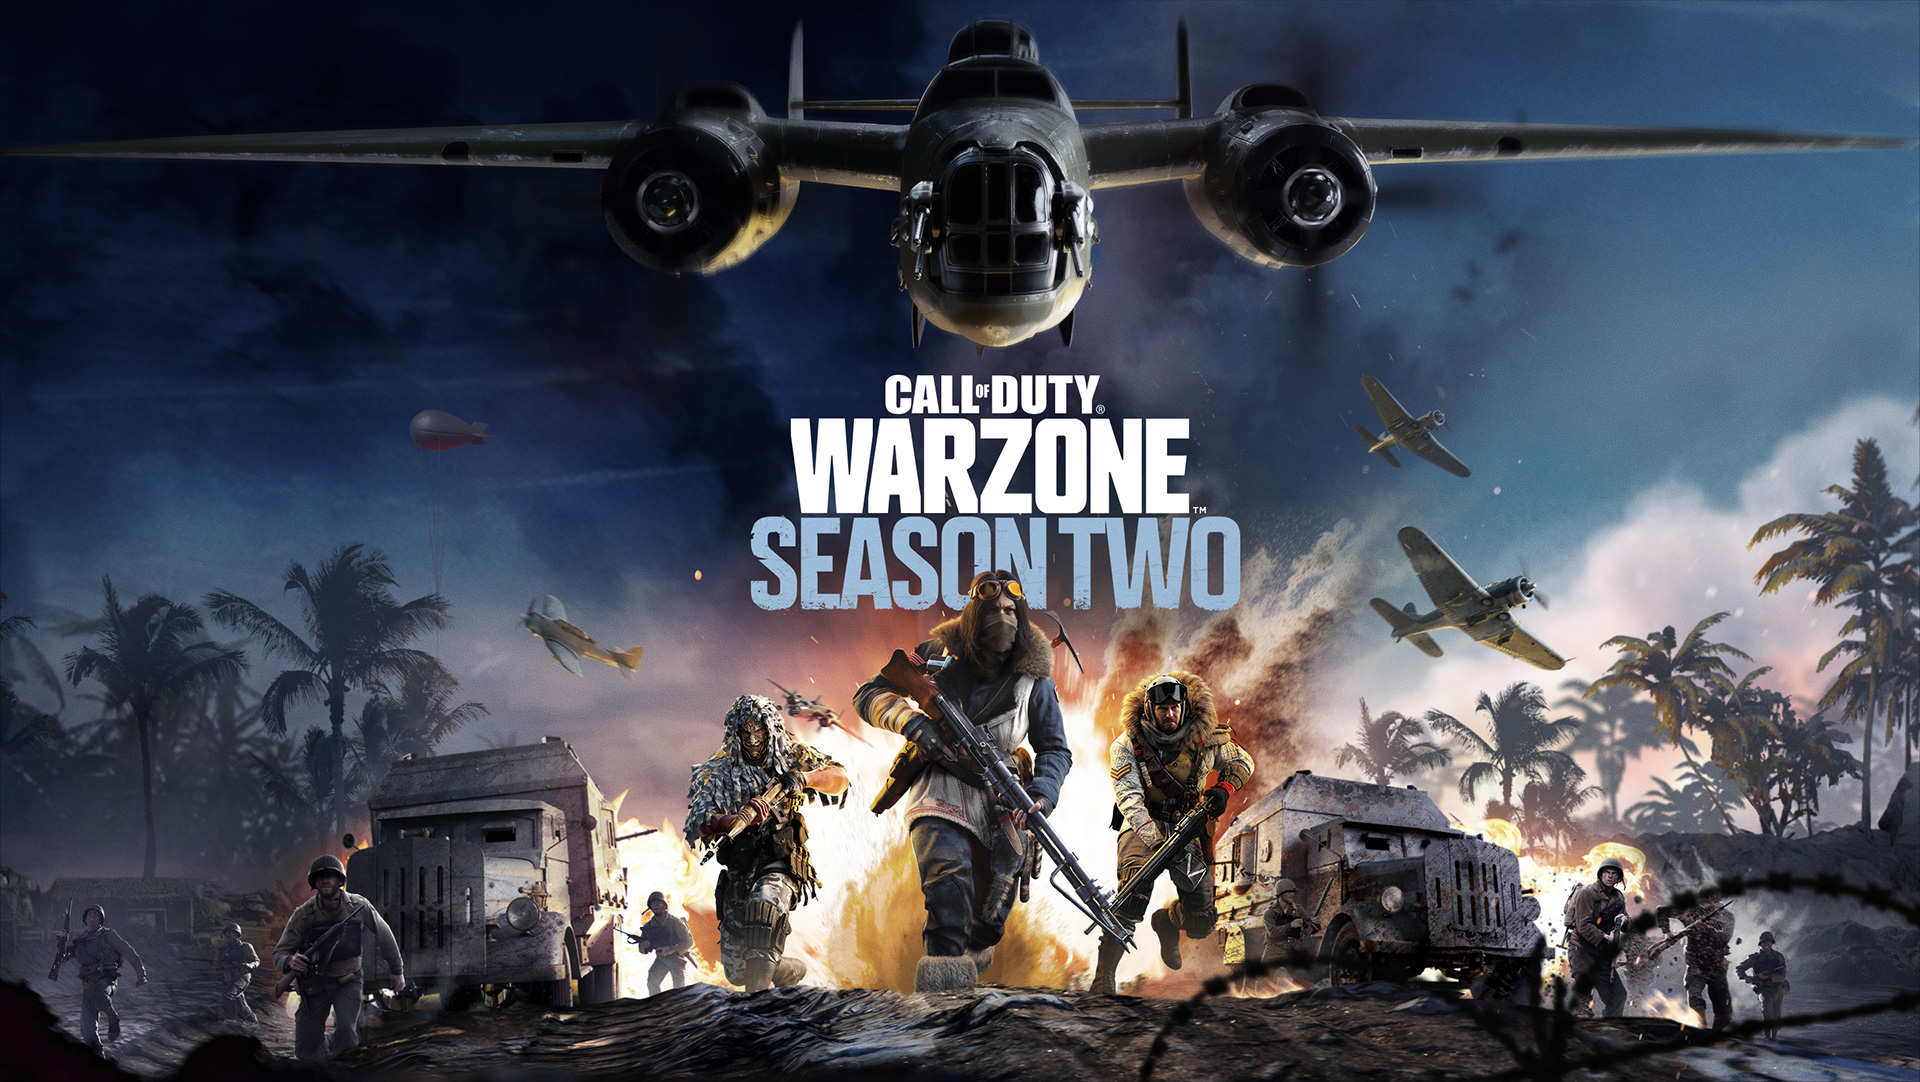 Ten Elite Strategies for Call of Duty®: Warzone™ Season Two's New Areas and Mechanics